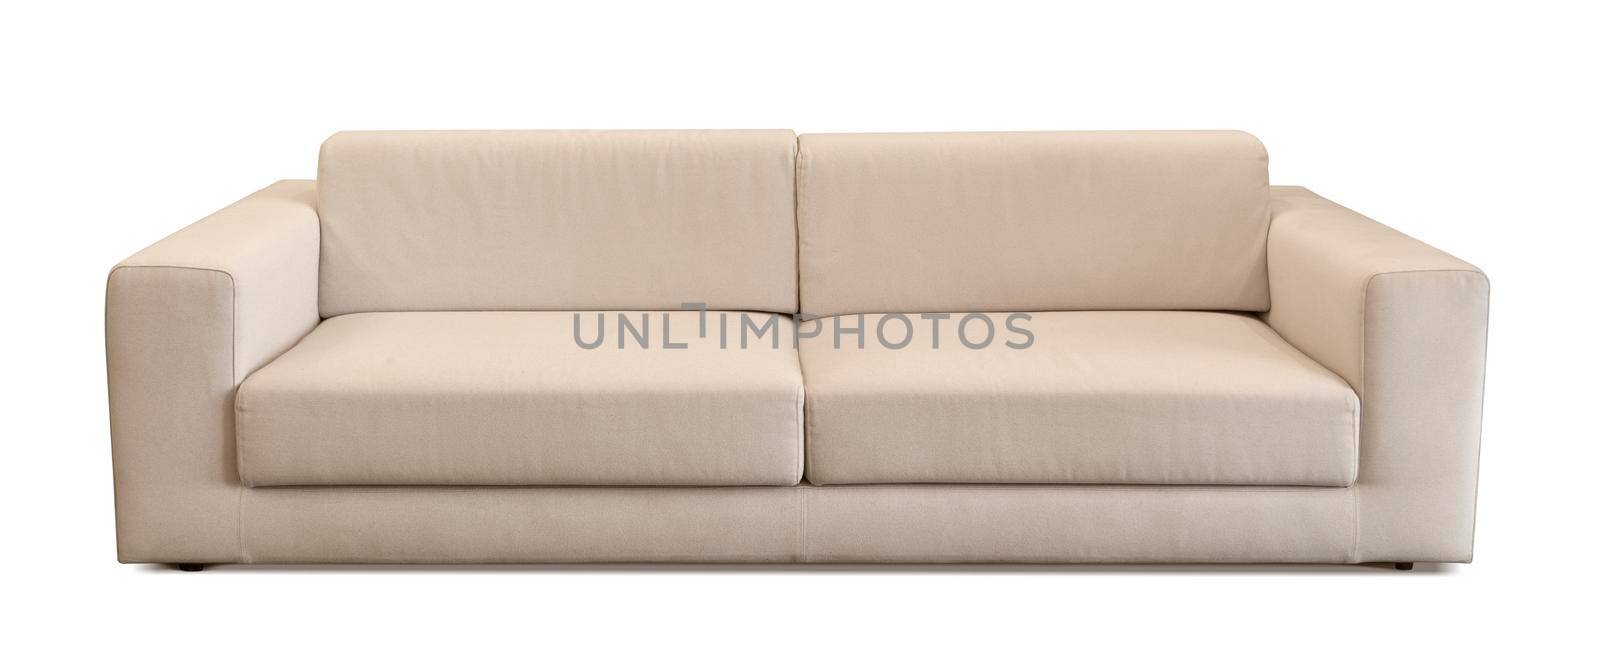 Front view beige couch on white.